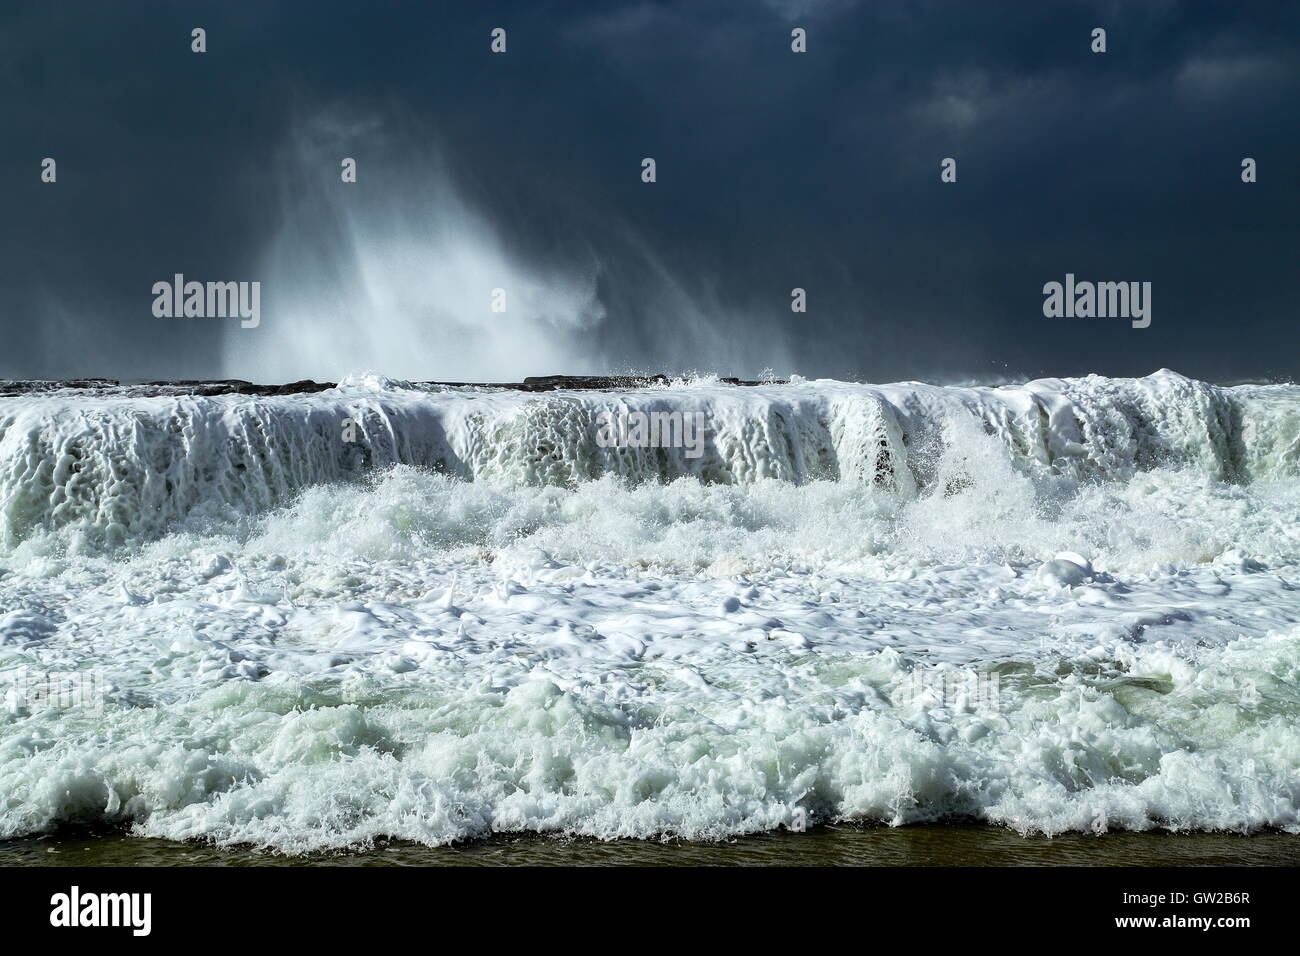 A winter storm whips up large and powerful waves which crash against a headland, under a heavy sky. Stock Photo